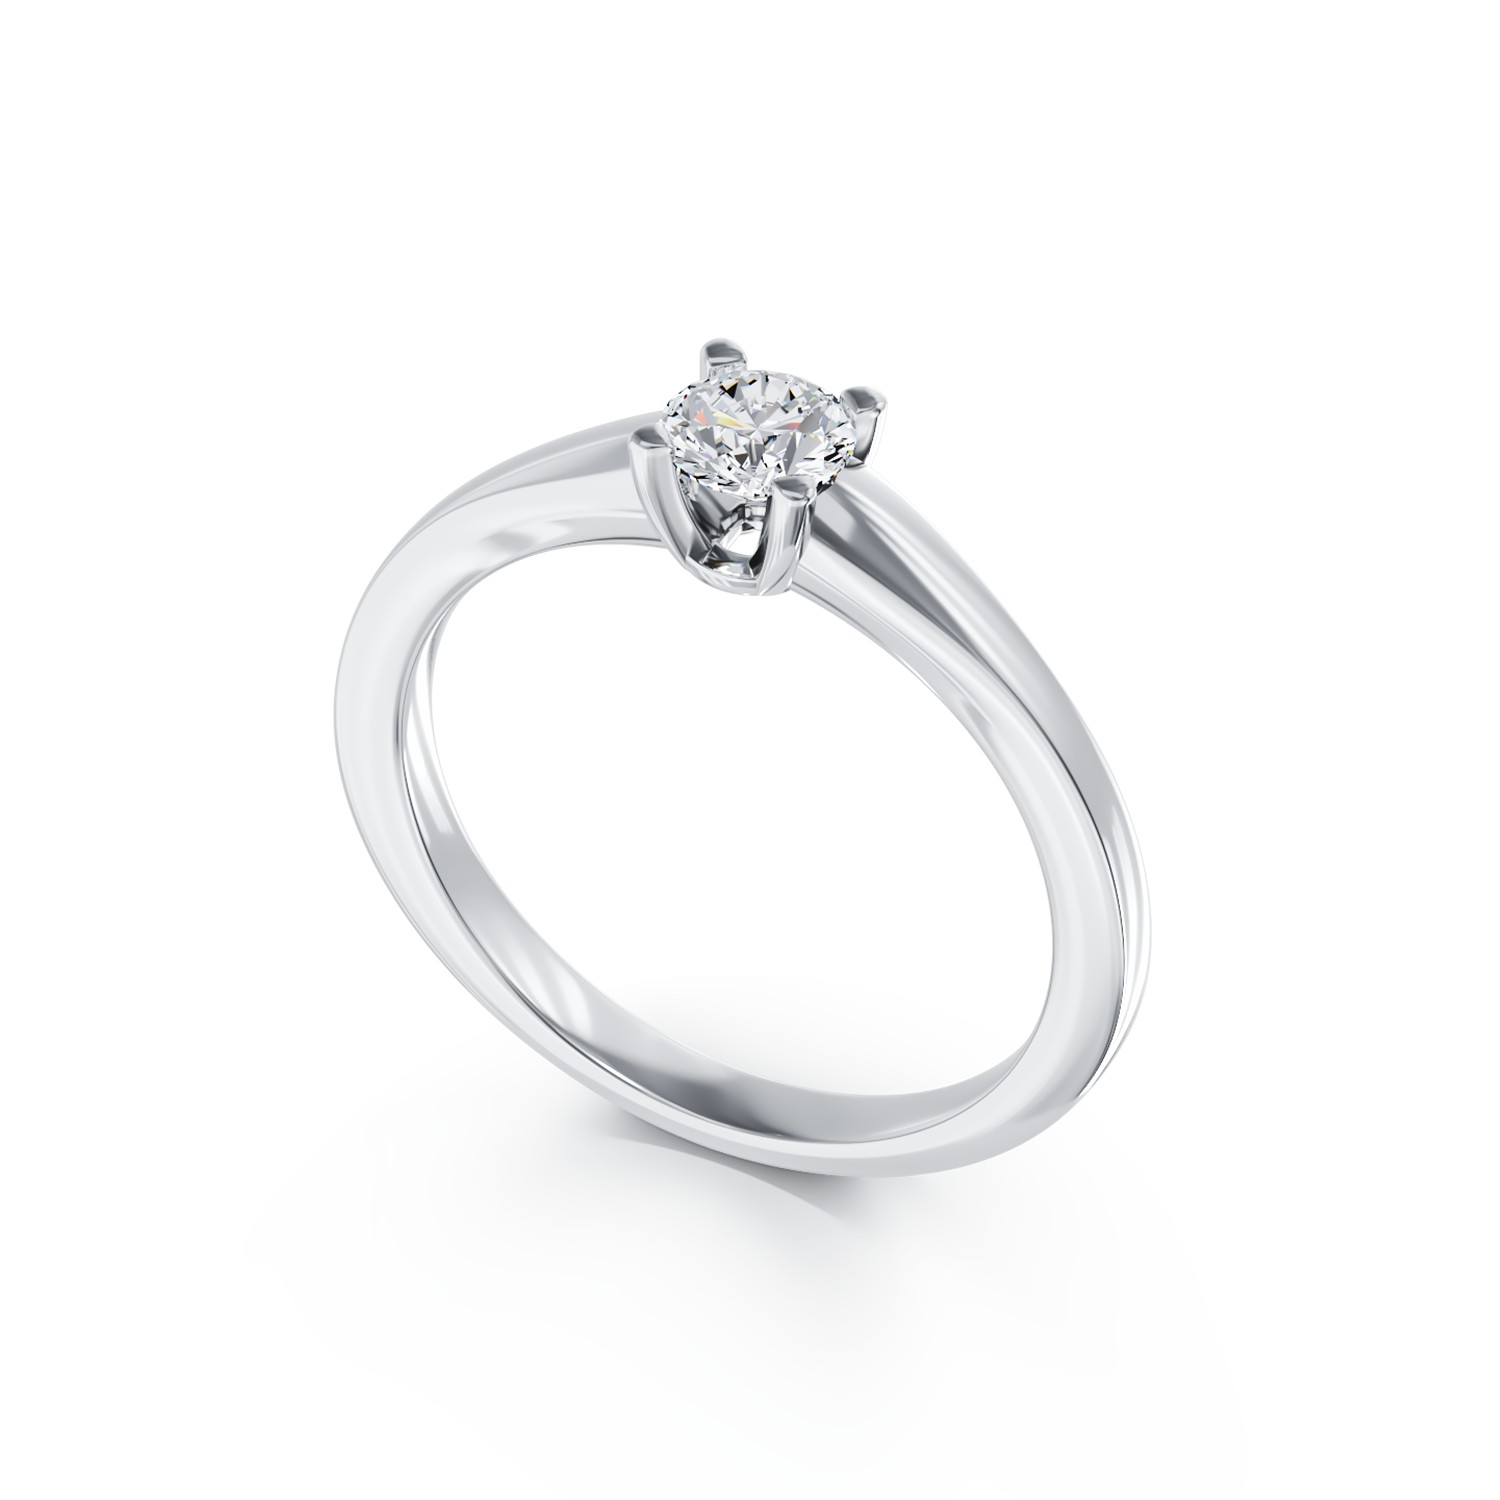 White gold engagement ring with 0.2ct solitaire diamond